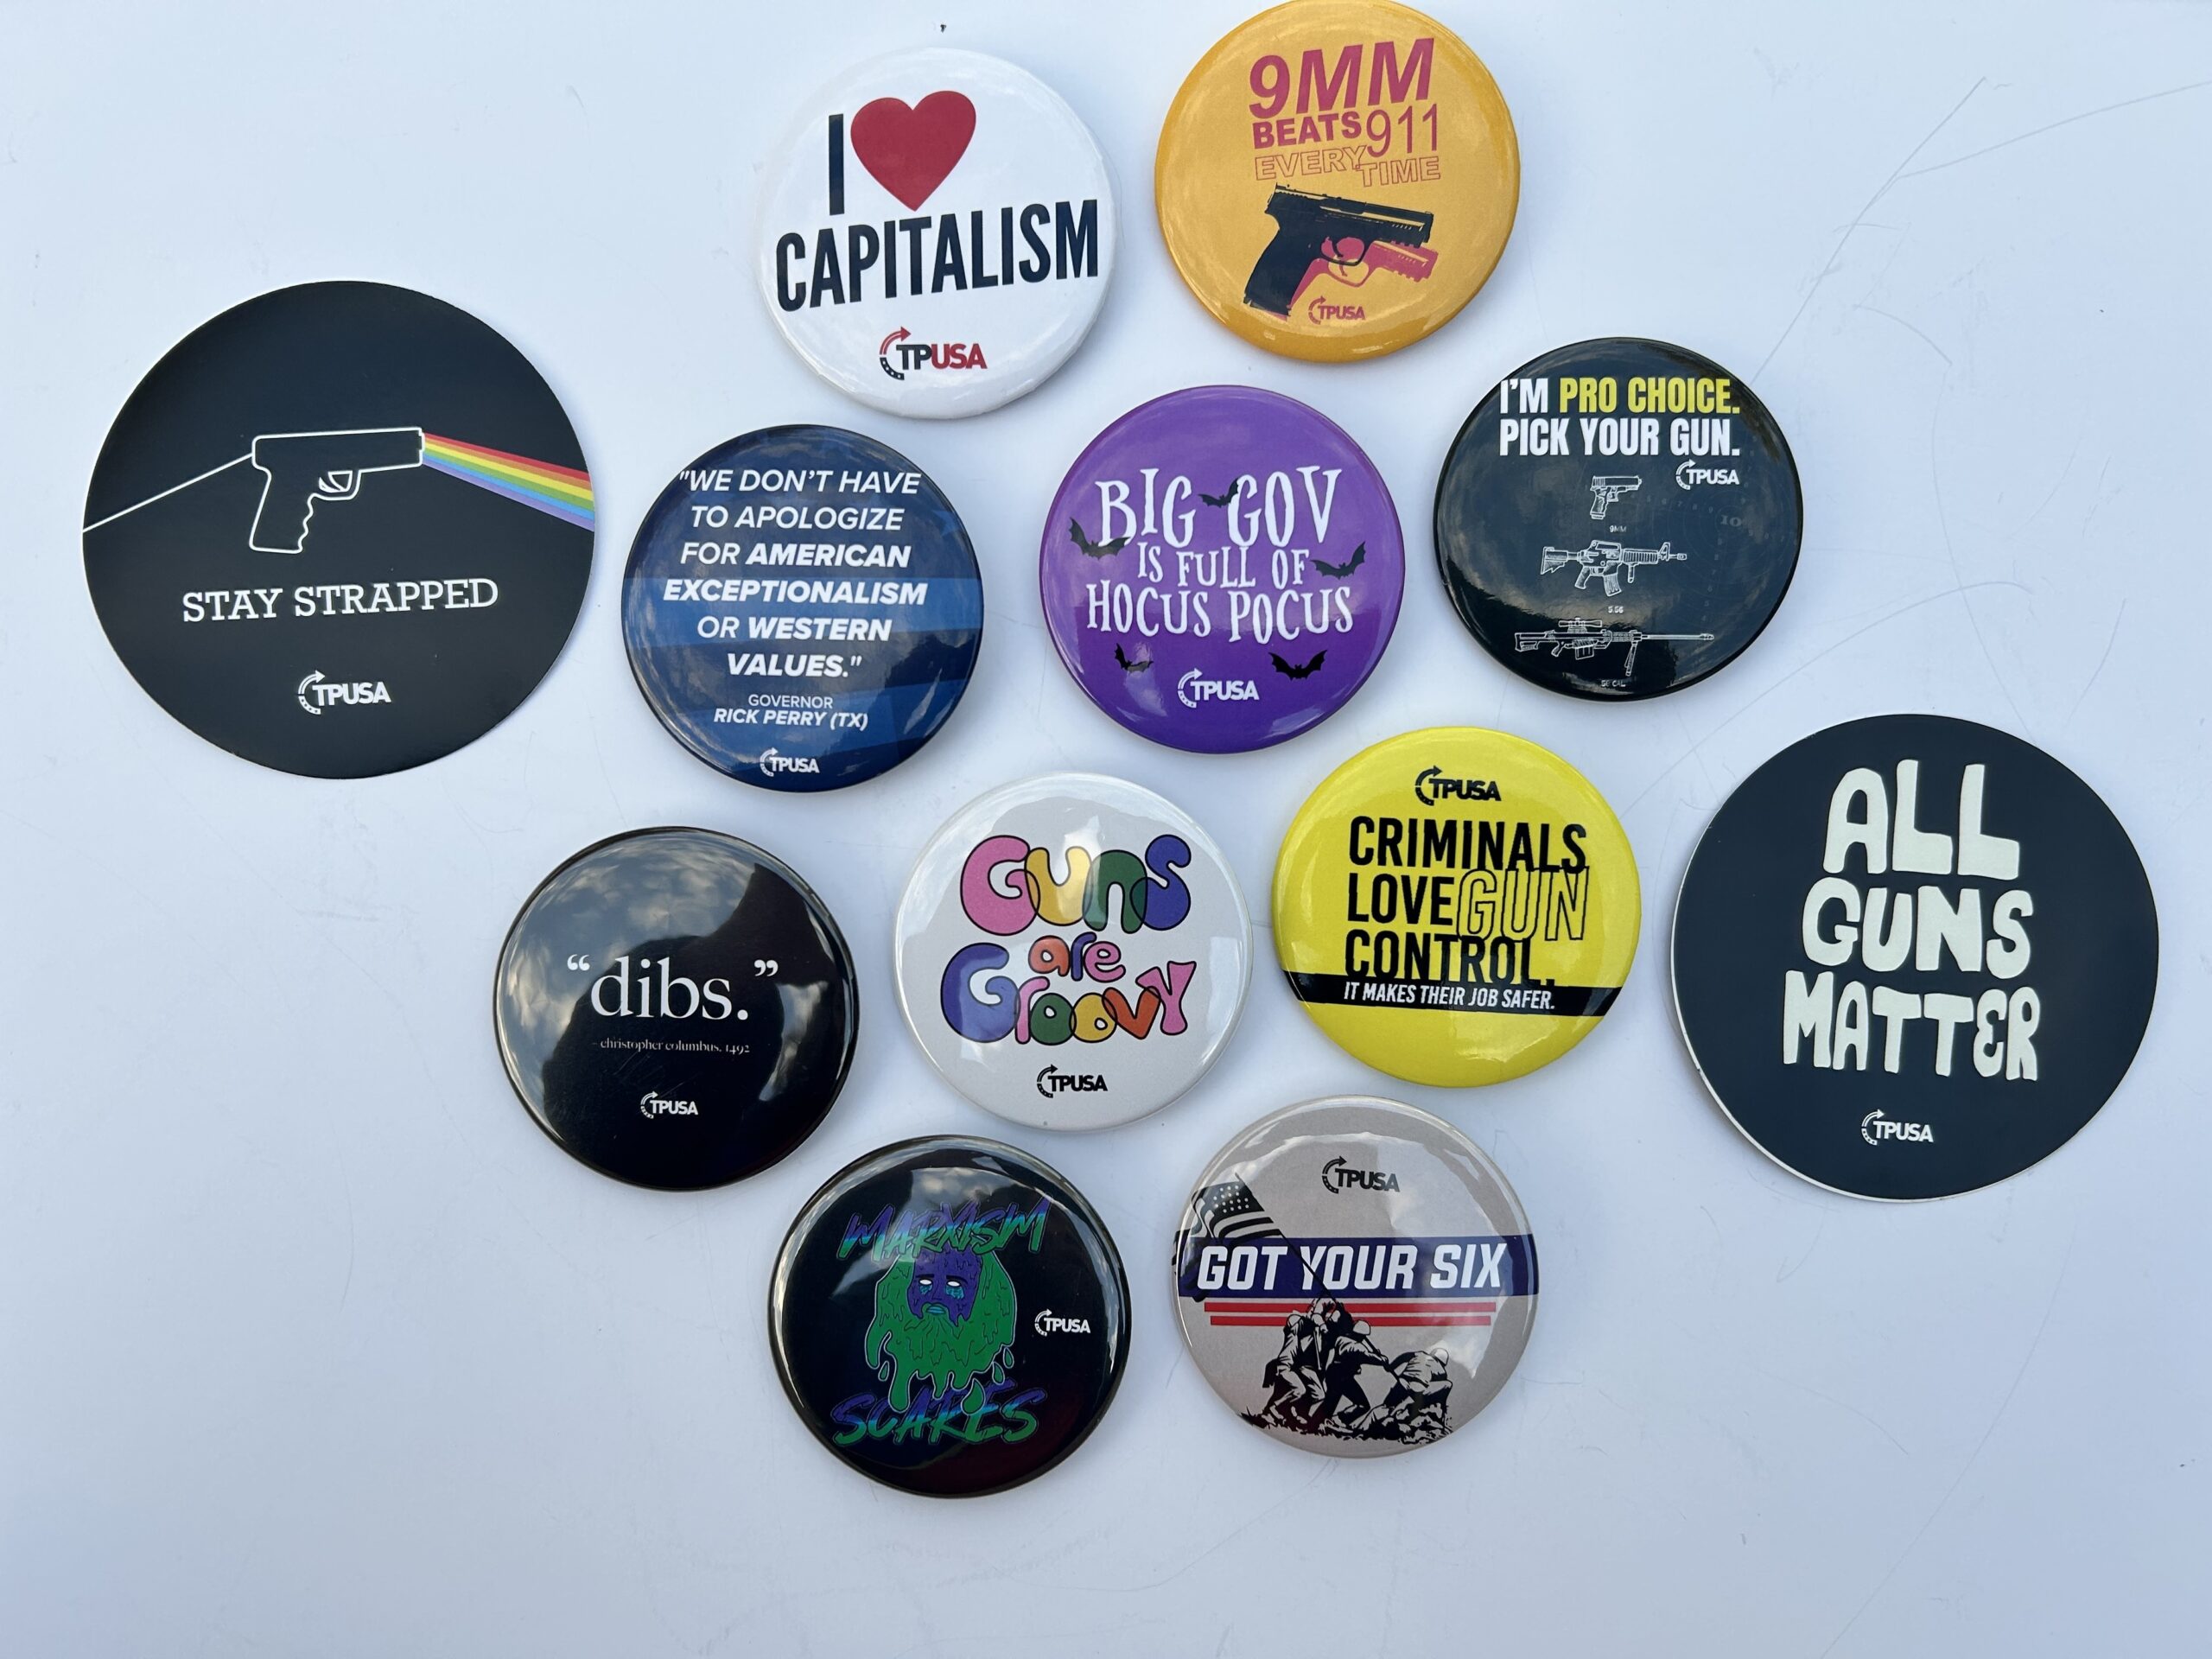 A collection of buttons from TPUSA with mottos like "I Heart Capitalism", "Guns are groovy", "All Guns Matter" and other designs meant to appeal to young people.